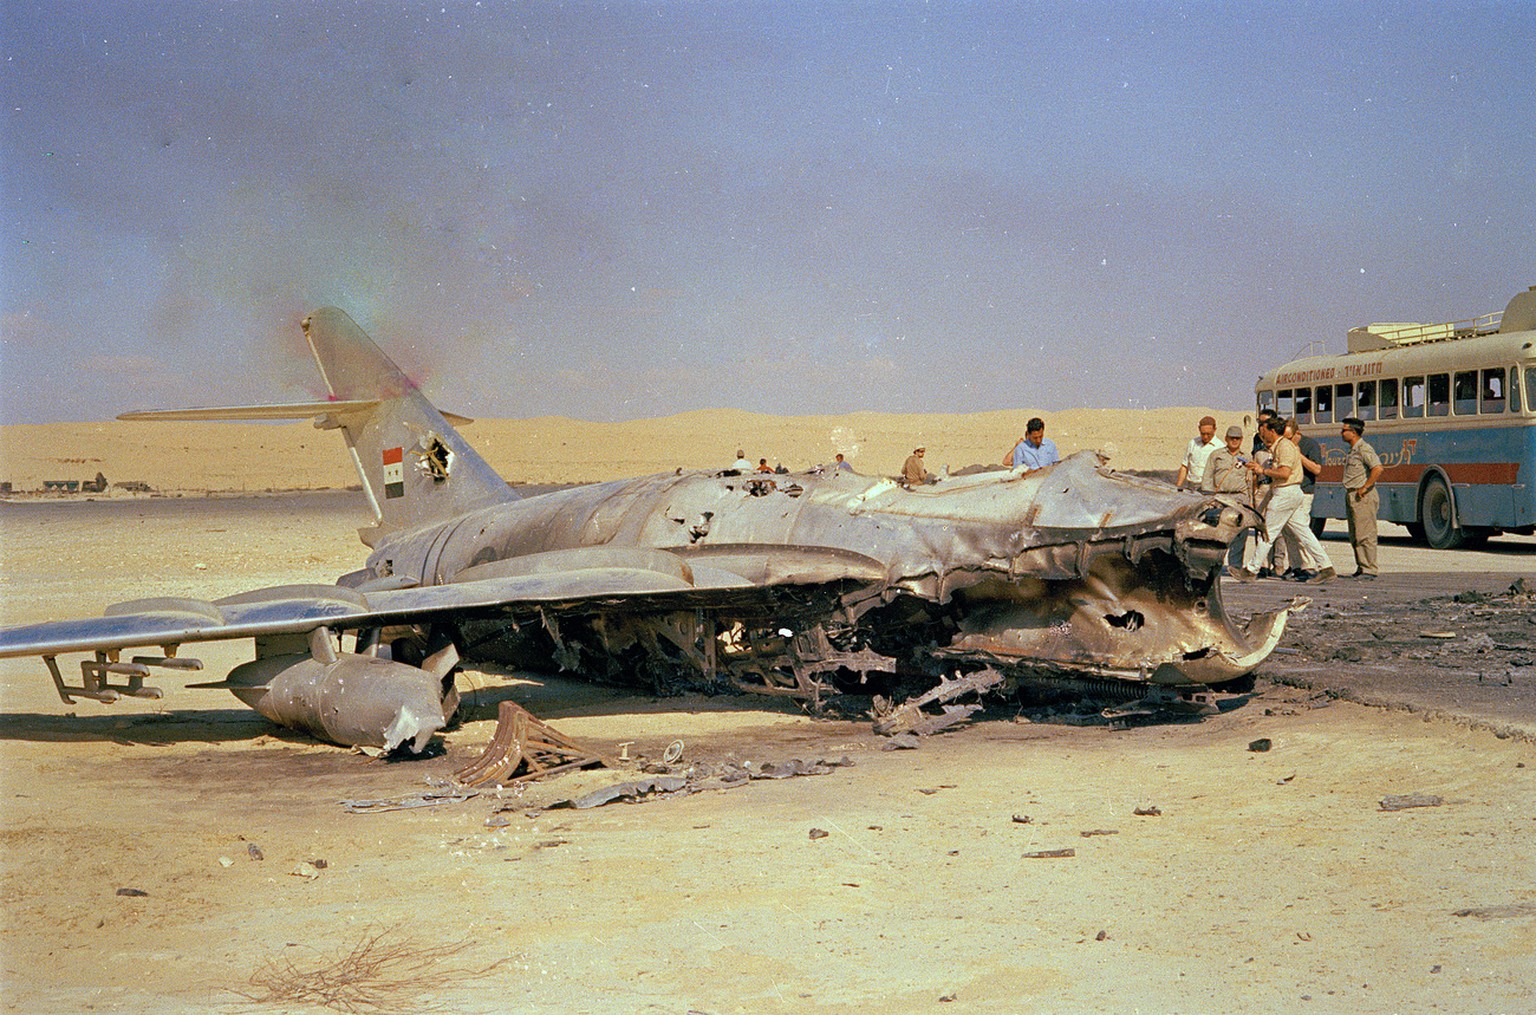 An Egyptian warplane lays destroyed on the ground following an attack by Israeli aircraft, June 1967. (KEYSTONE/AP Photo/Str)